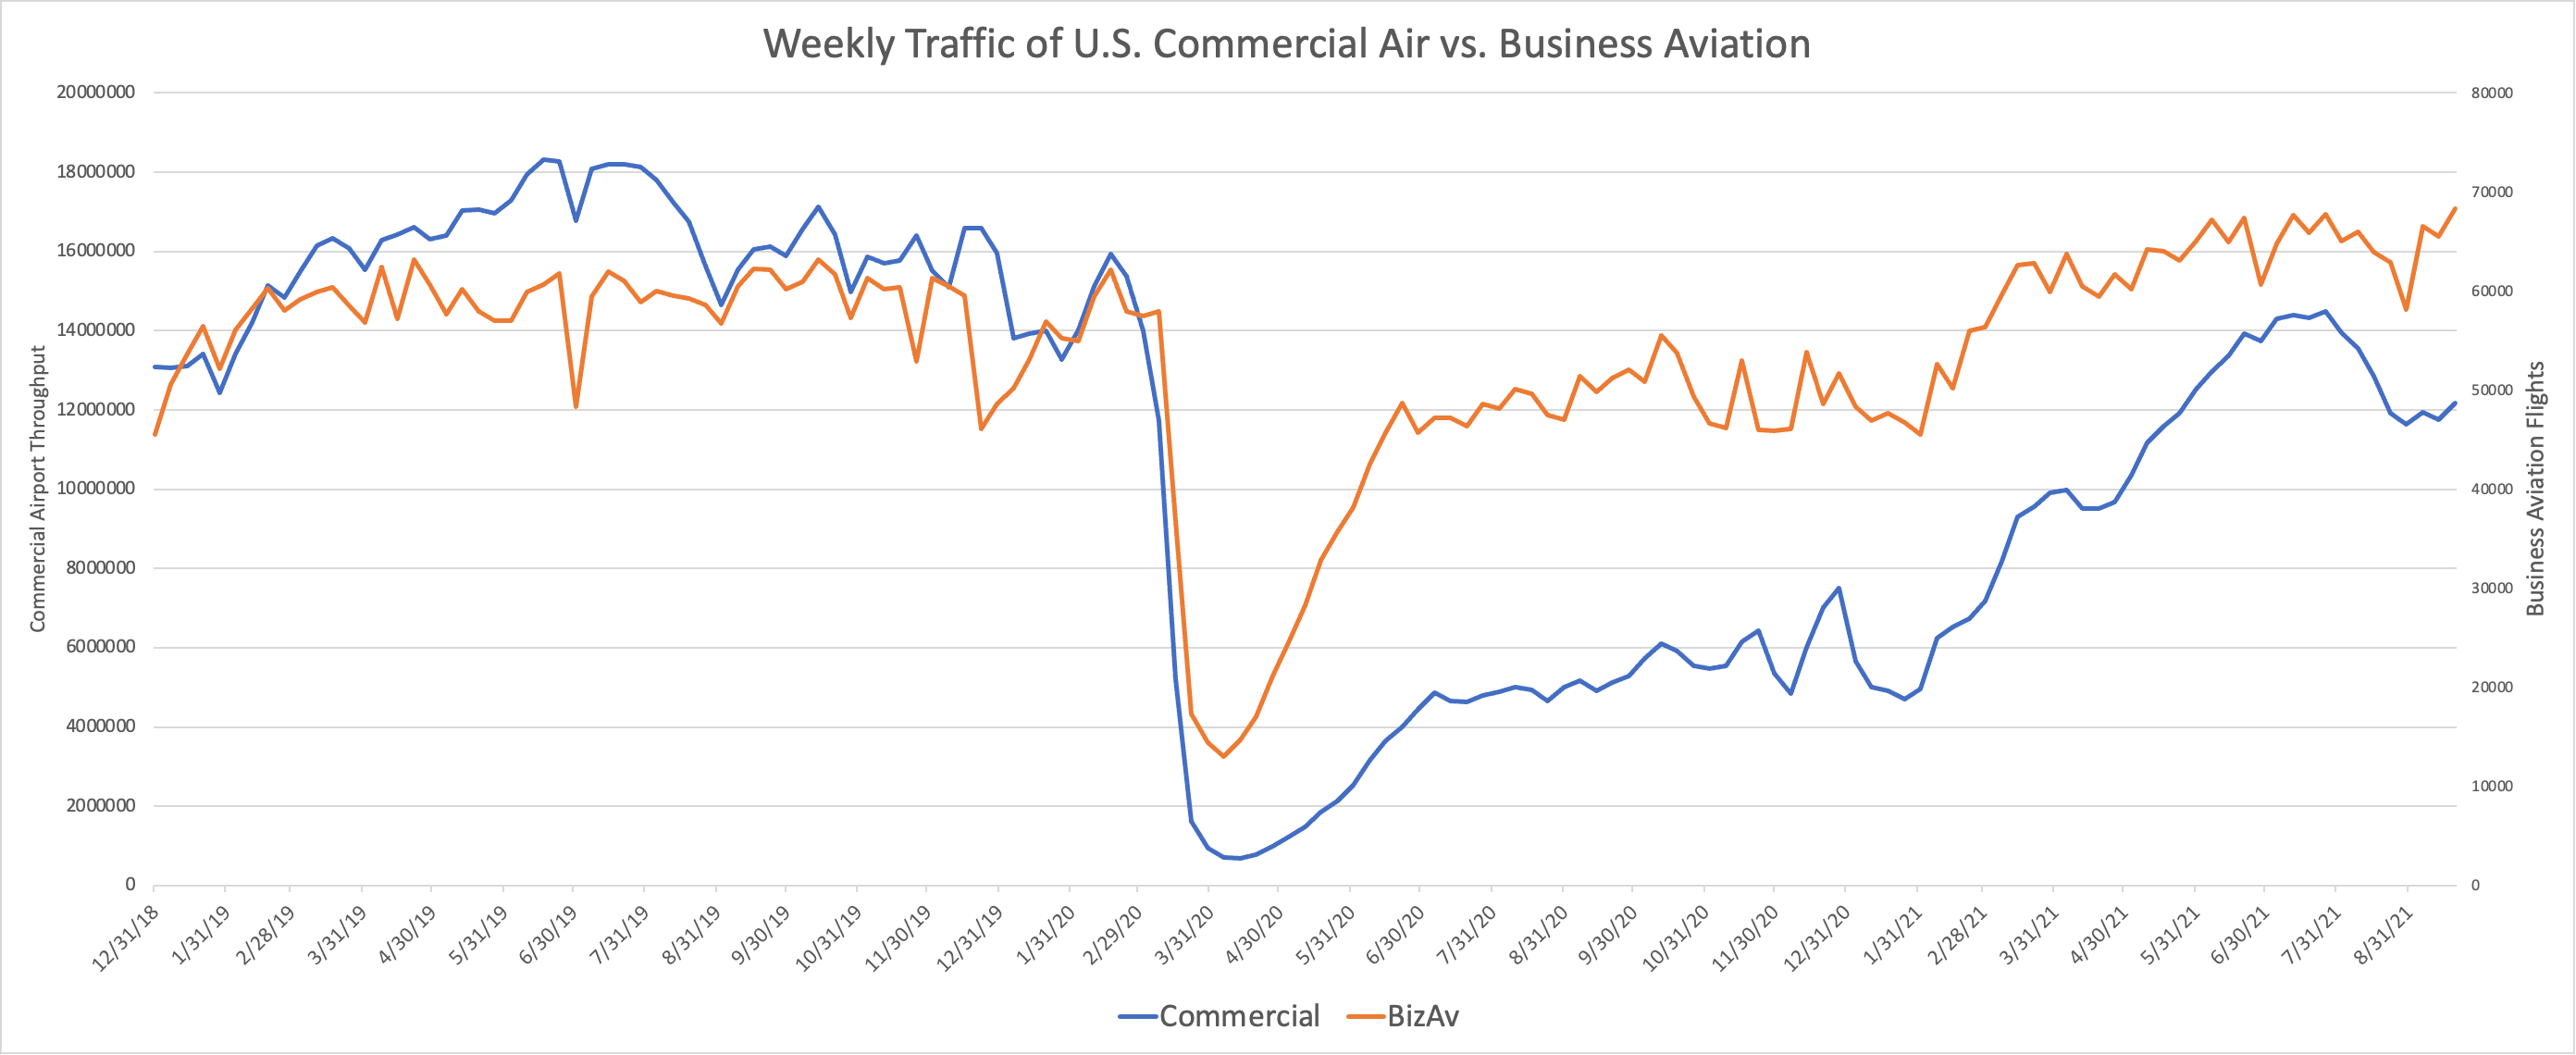 Weekly Traffic of U.S. Commercial Air vs. Business Aviation